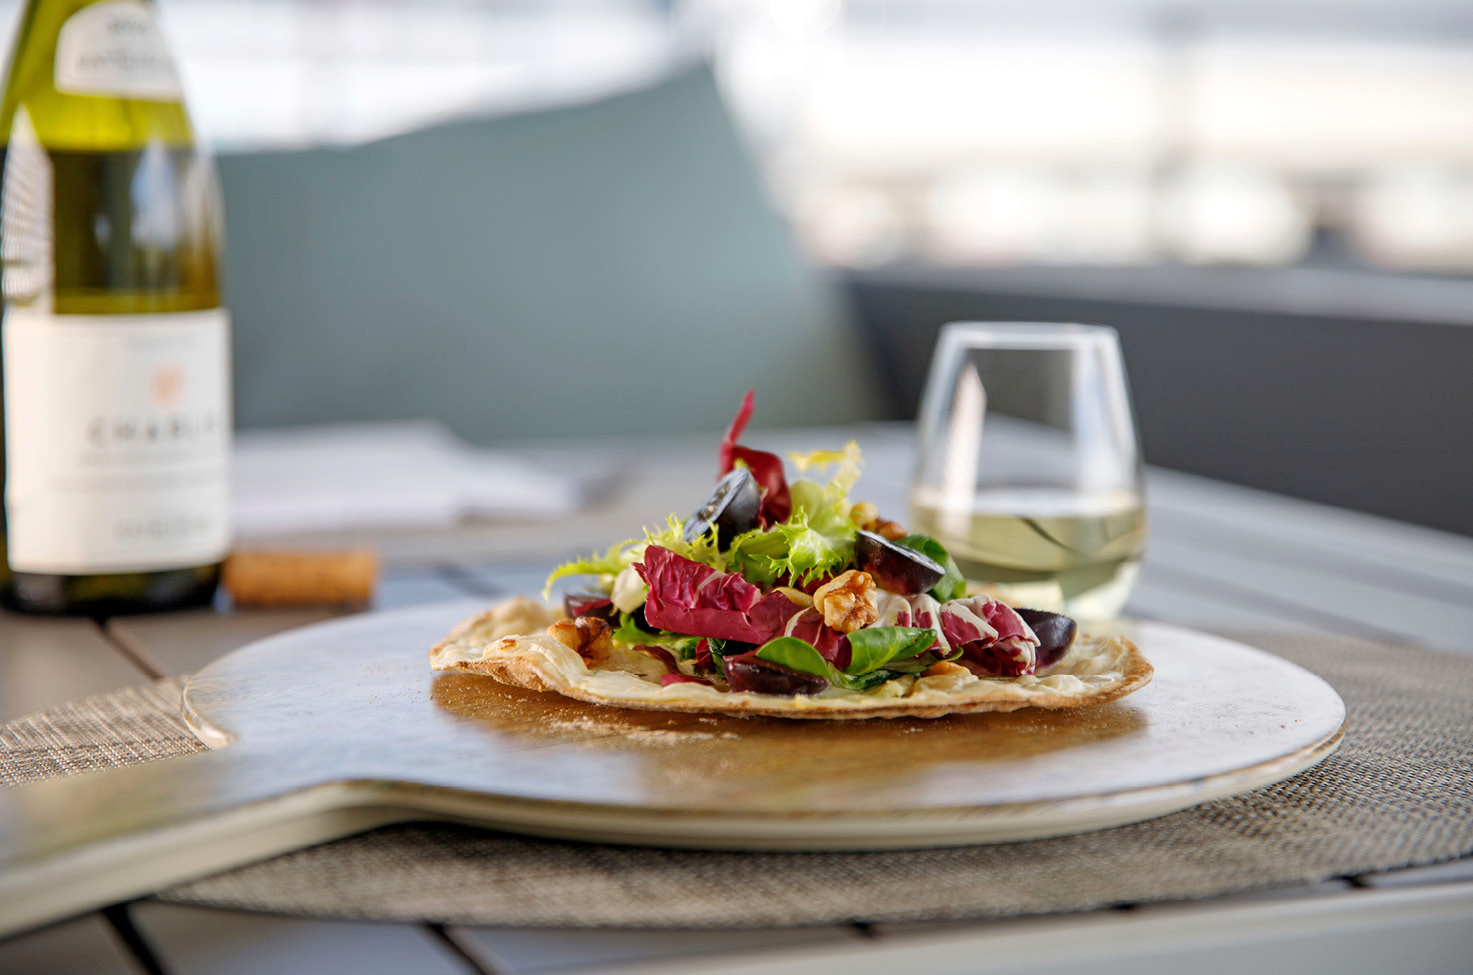 Flatbread topped with fresh salad and a bottle of white wine